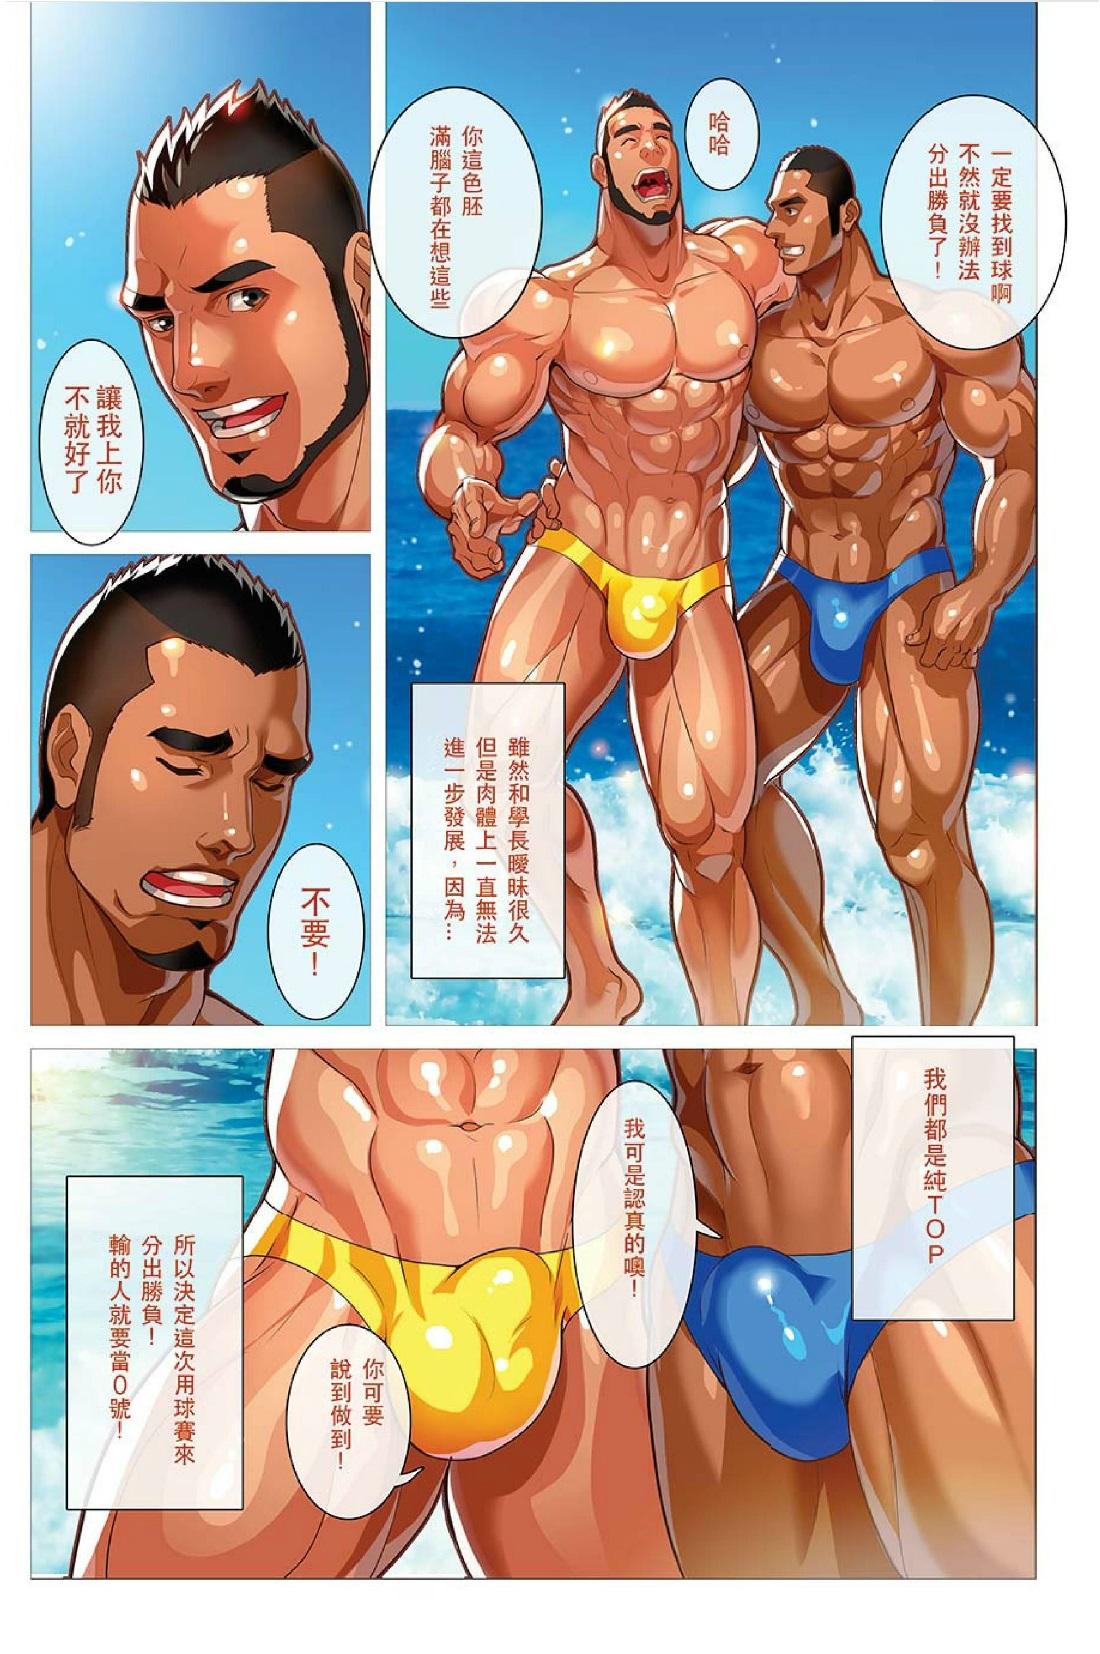 Threesome 夏日男子筋肉潛艇堡 (Summer's end Muscle Heat - The Boys Of Summer 2015) by 大雄 (Da Sexy Xiong) + Bonus Prequel [CH] Soapy Massage - Page 4